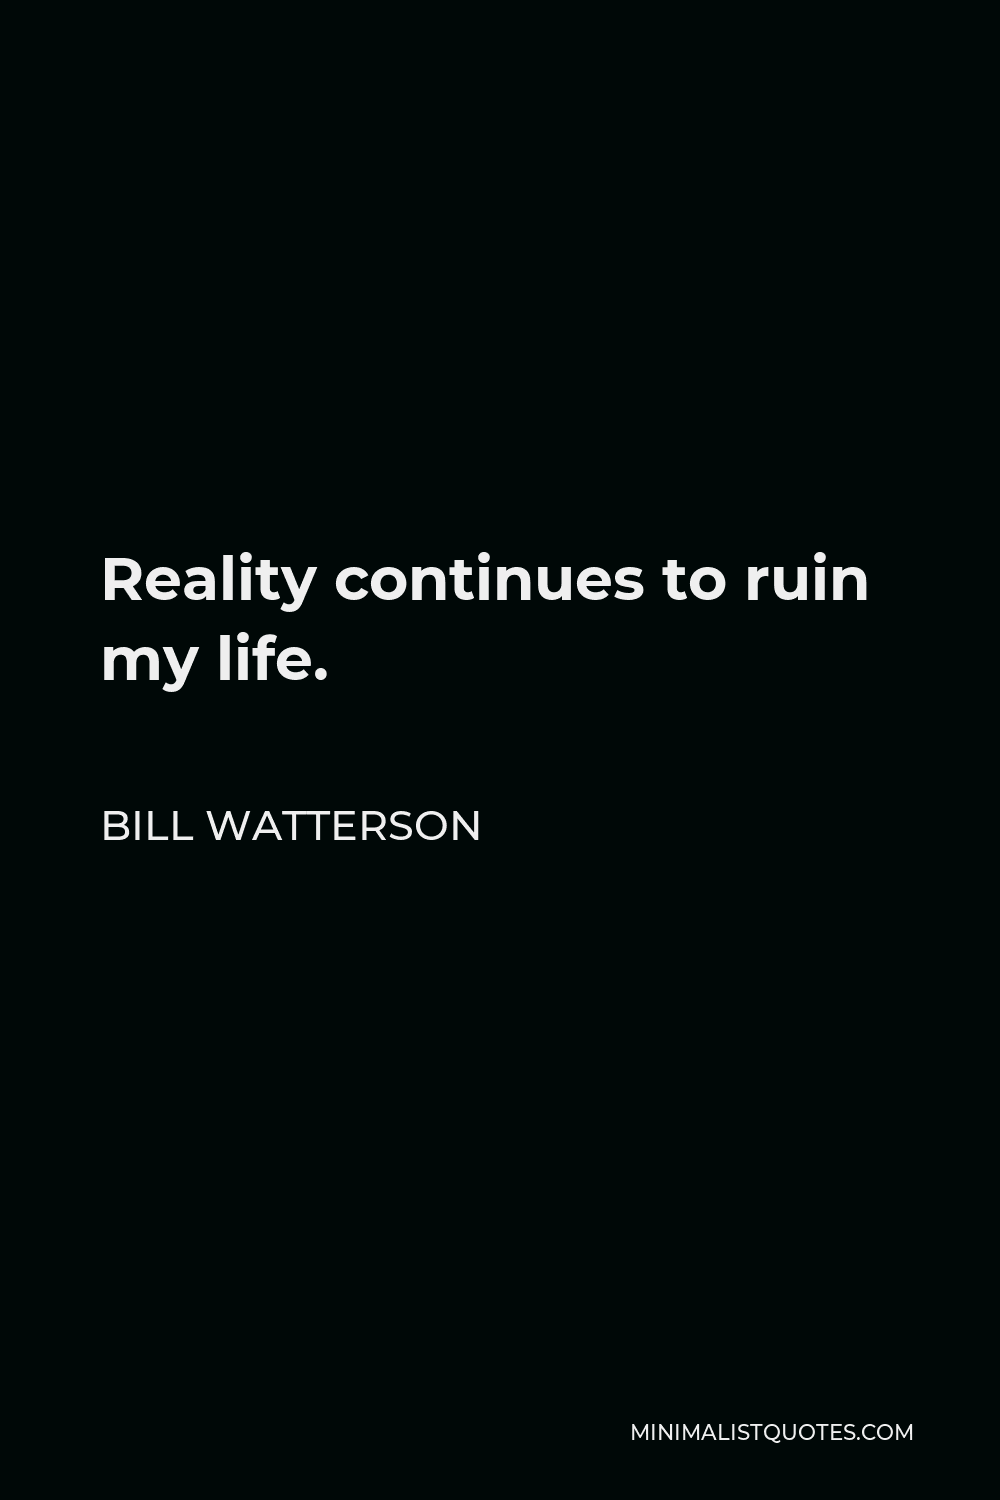 Bill Watterson Quote - Reality continues to ruin my life.